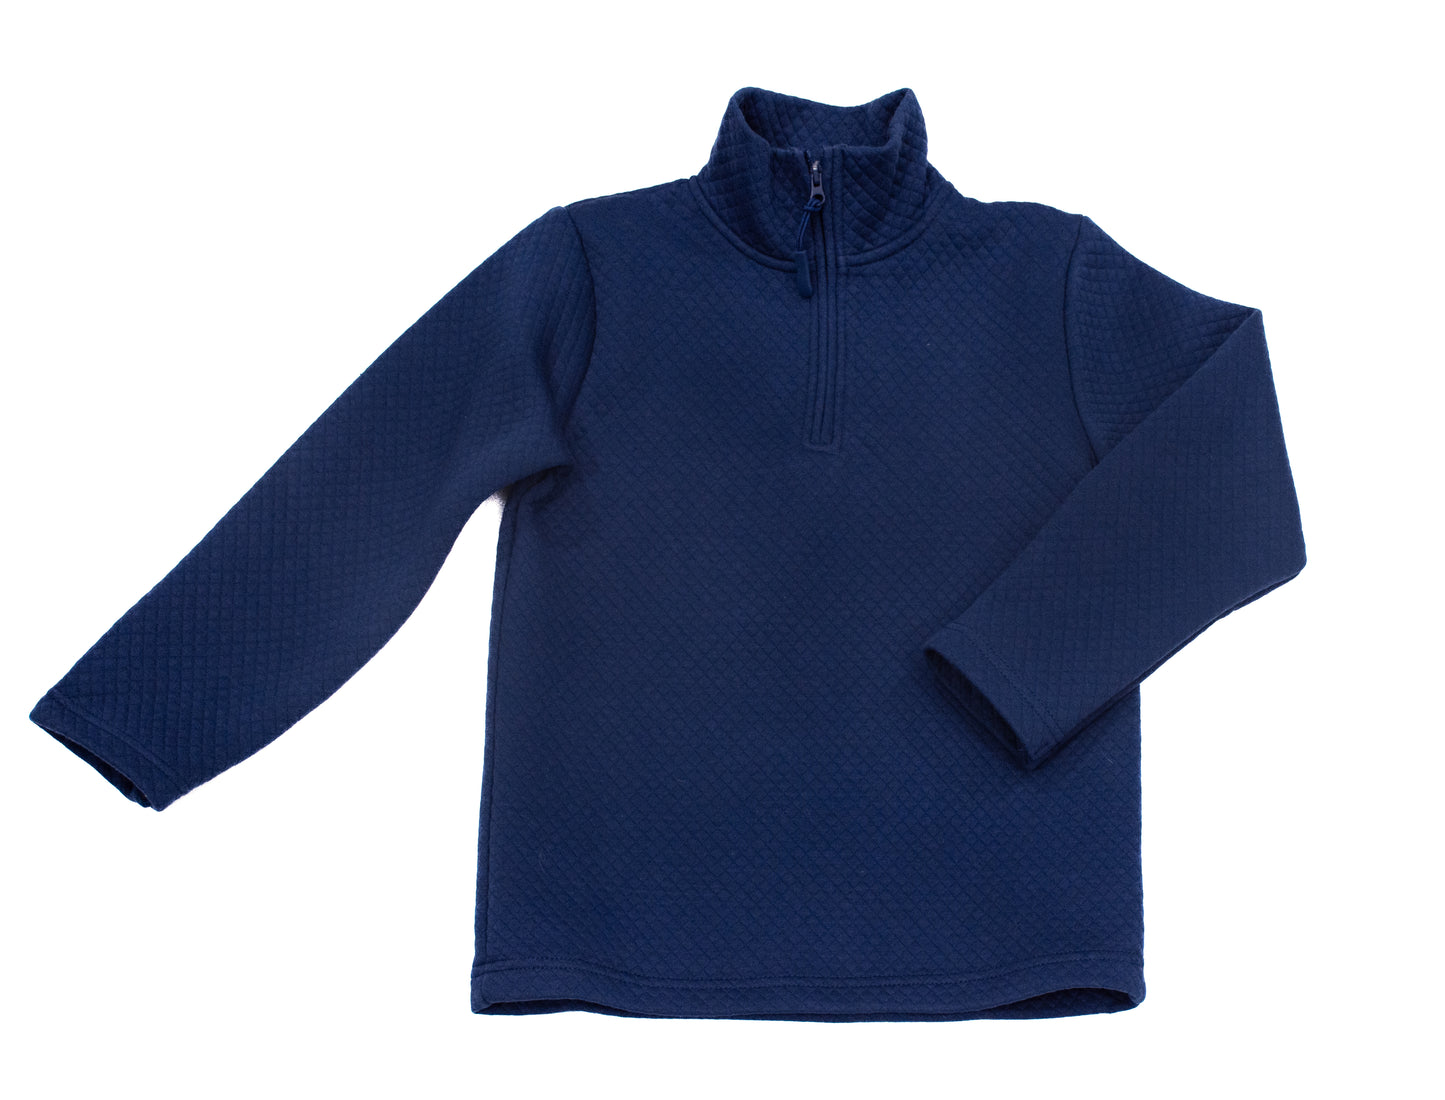 Quilted Navy 1/4 Zip pullover - PREORDER*